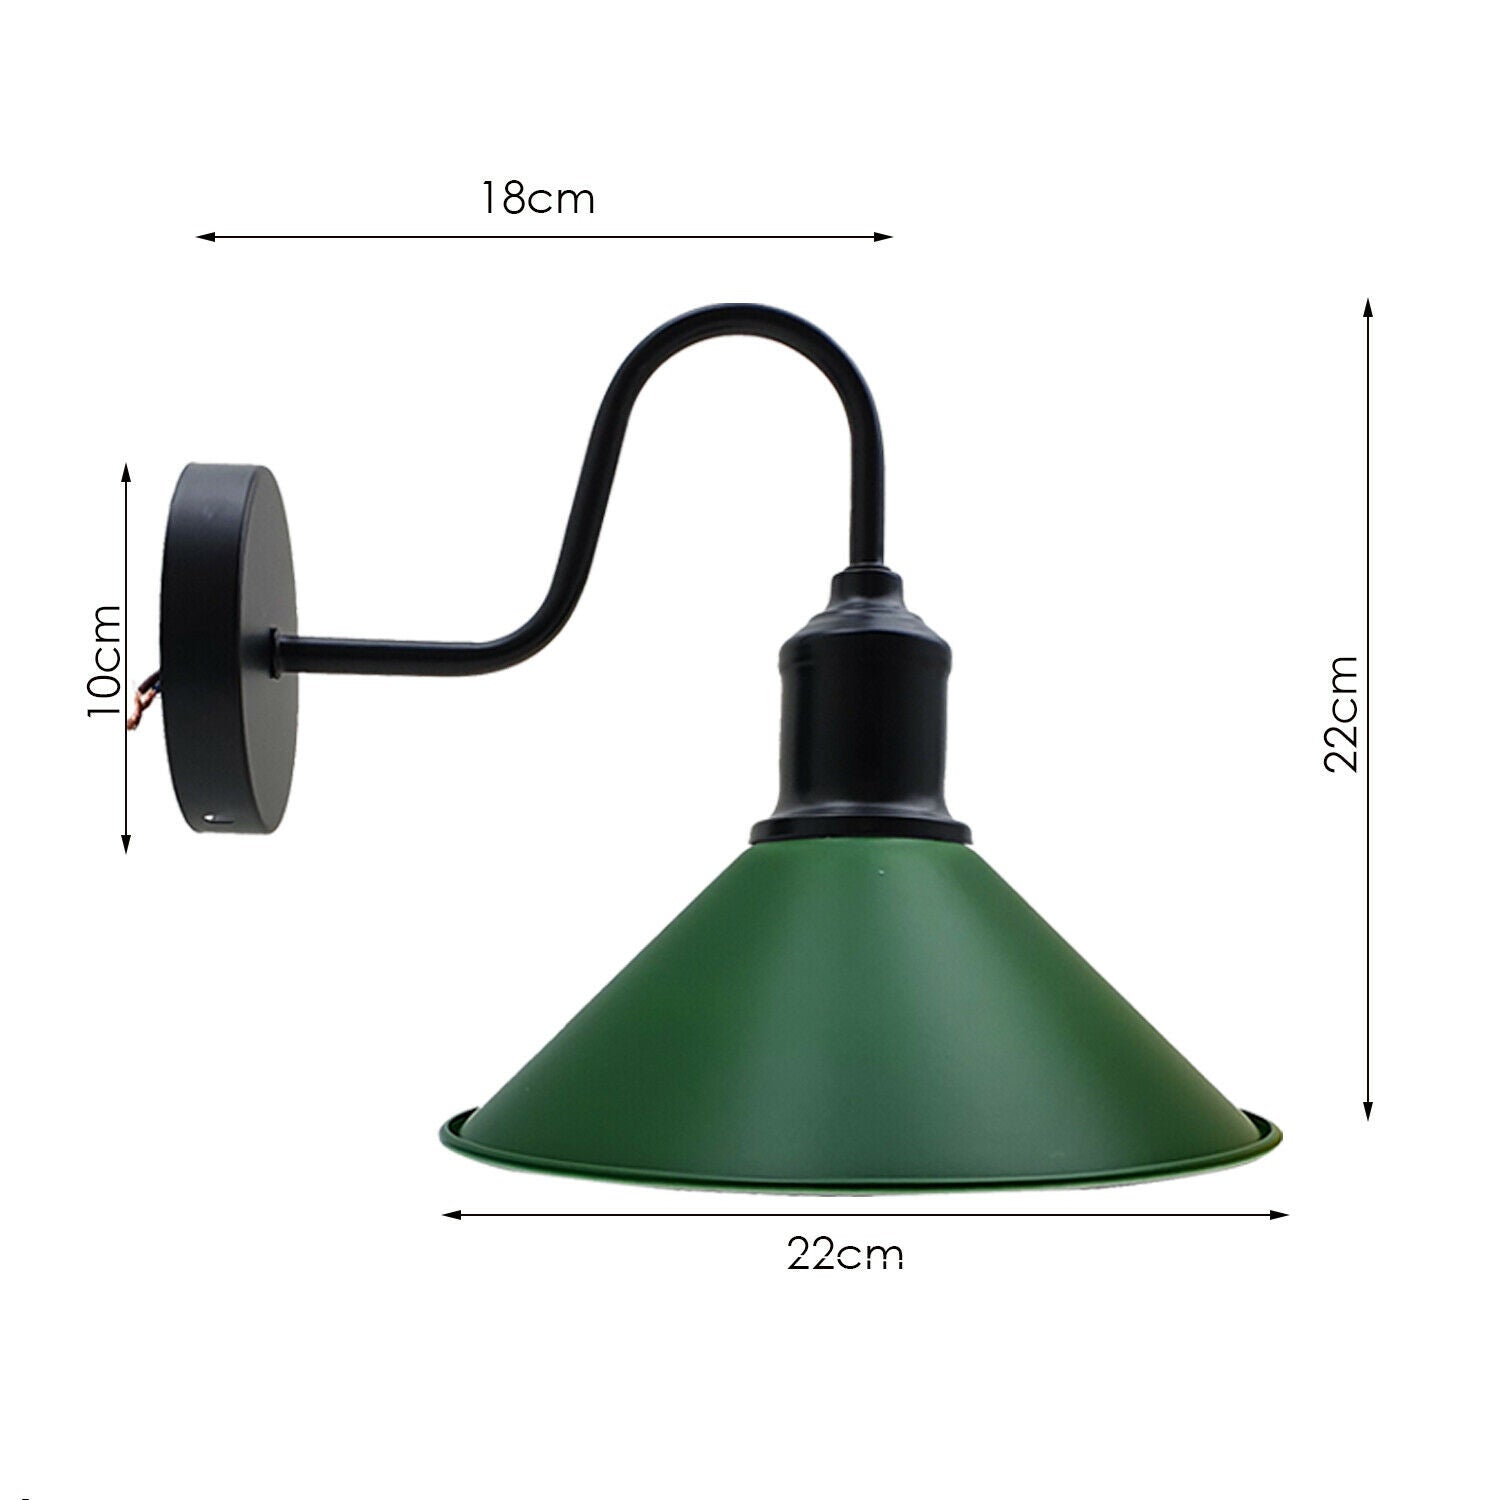 Modern Retro Industrial Green Color Wall Mounted Lights Rustic Sconce Lamps Fixture~2482 - LEDSone UK Ltd